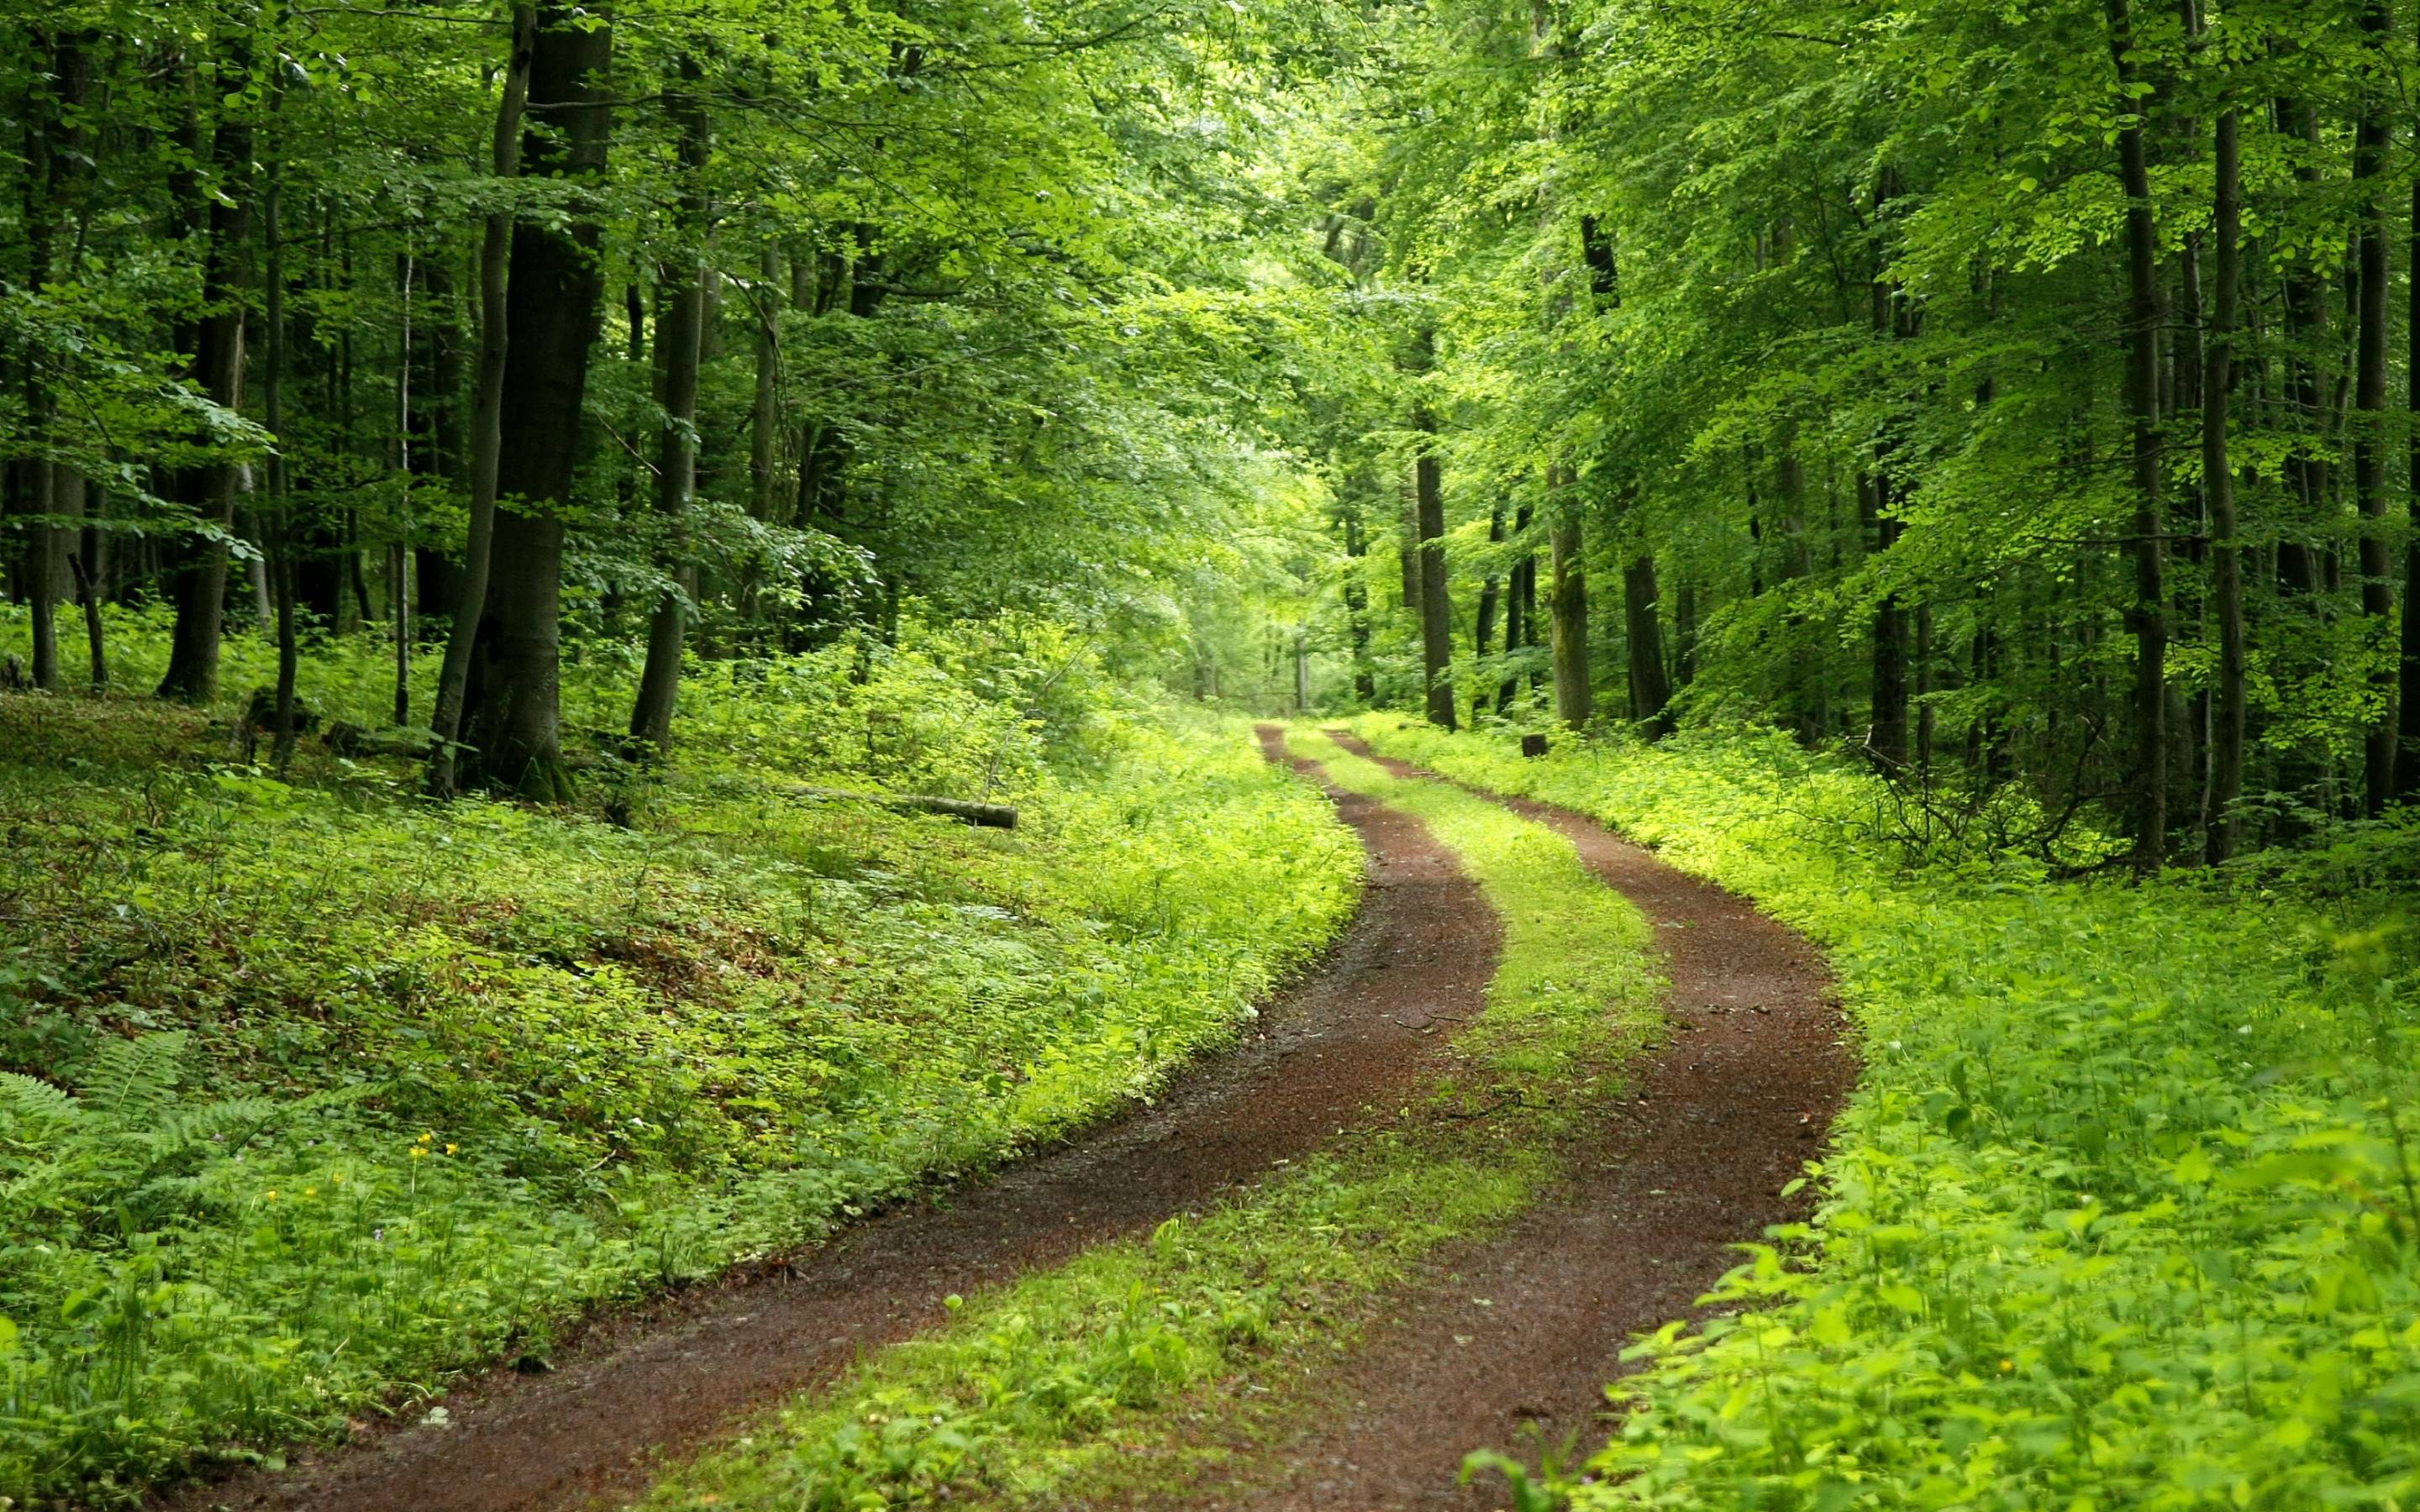 Wallpaper Green Trees and Brown Dirt Road, Background Free Image